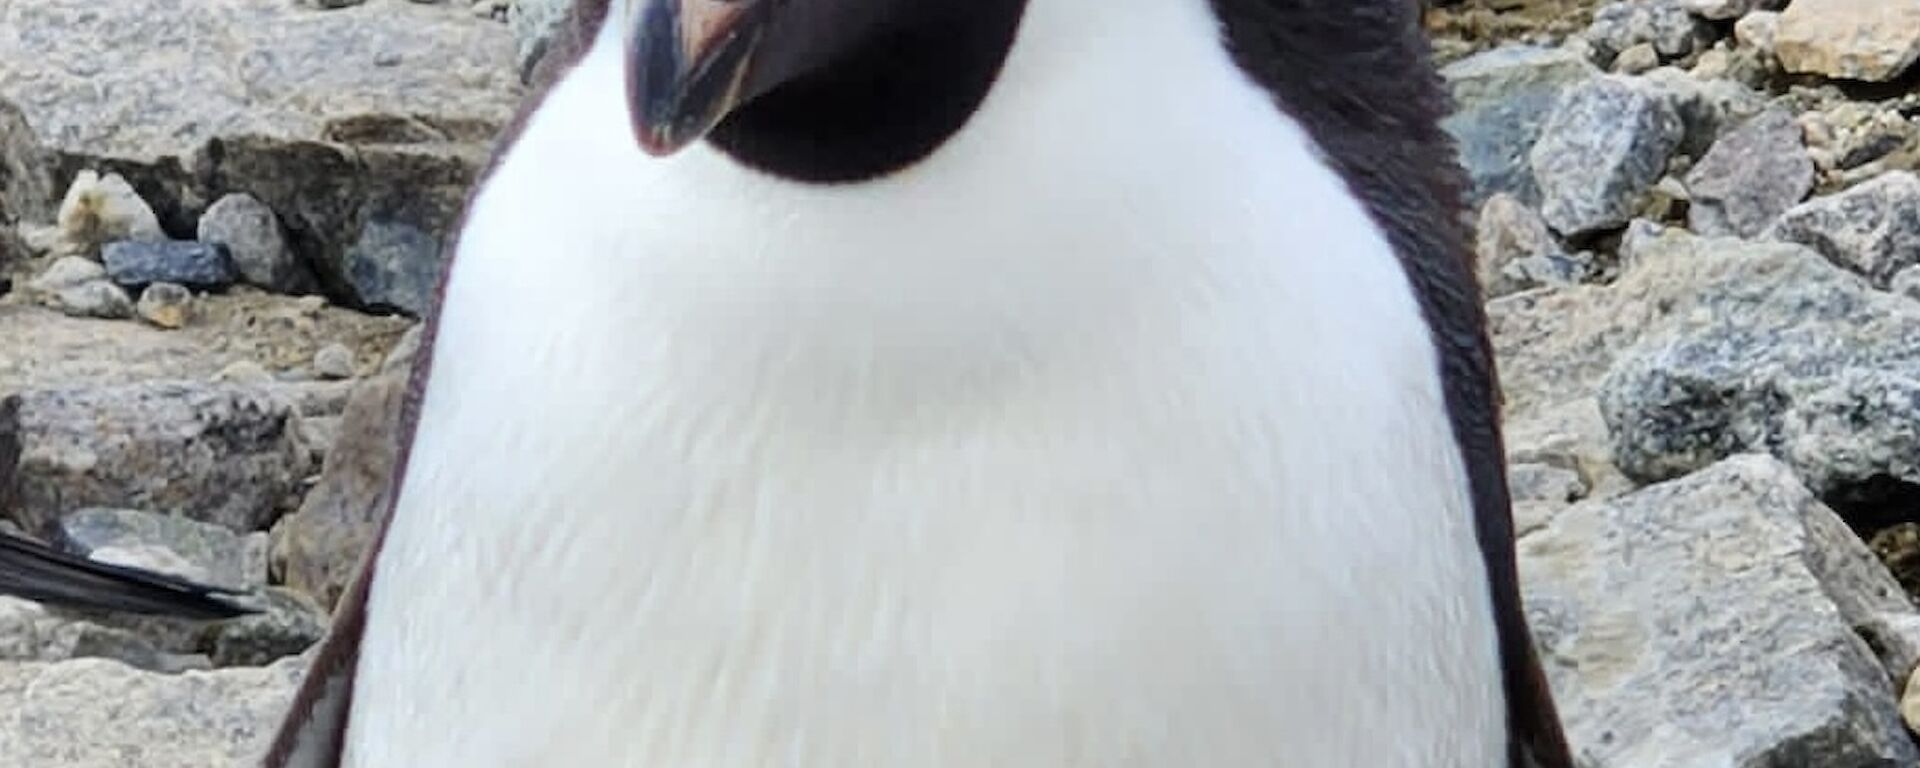 A close up view of a penguin, staring directly at the camera, with its' head tilted slightly to the left of frame. The penguin has a raised band of black feathers behind its' head which gives it an appearance of a styled haircut. The background of the photo is filled with large grey rocks.